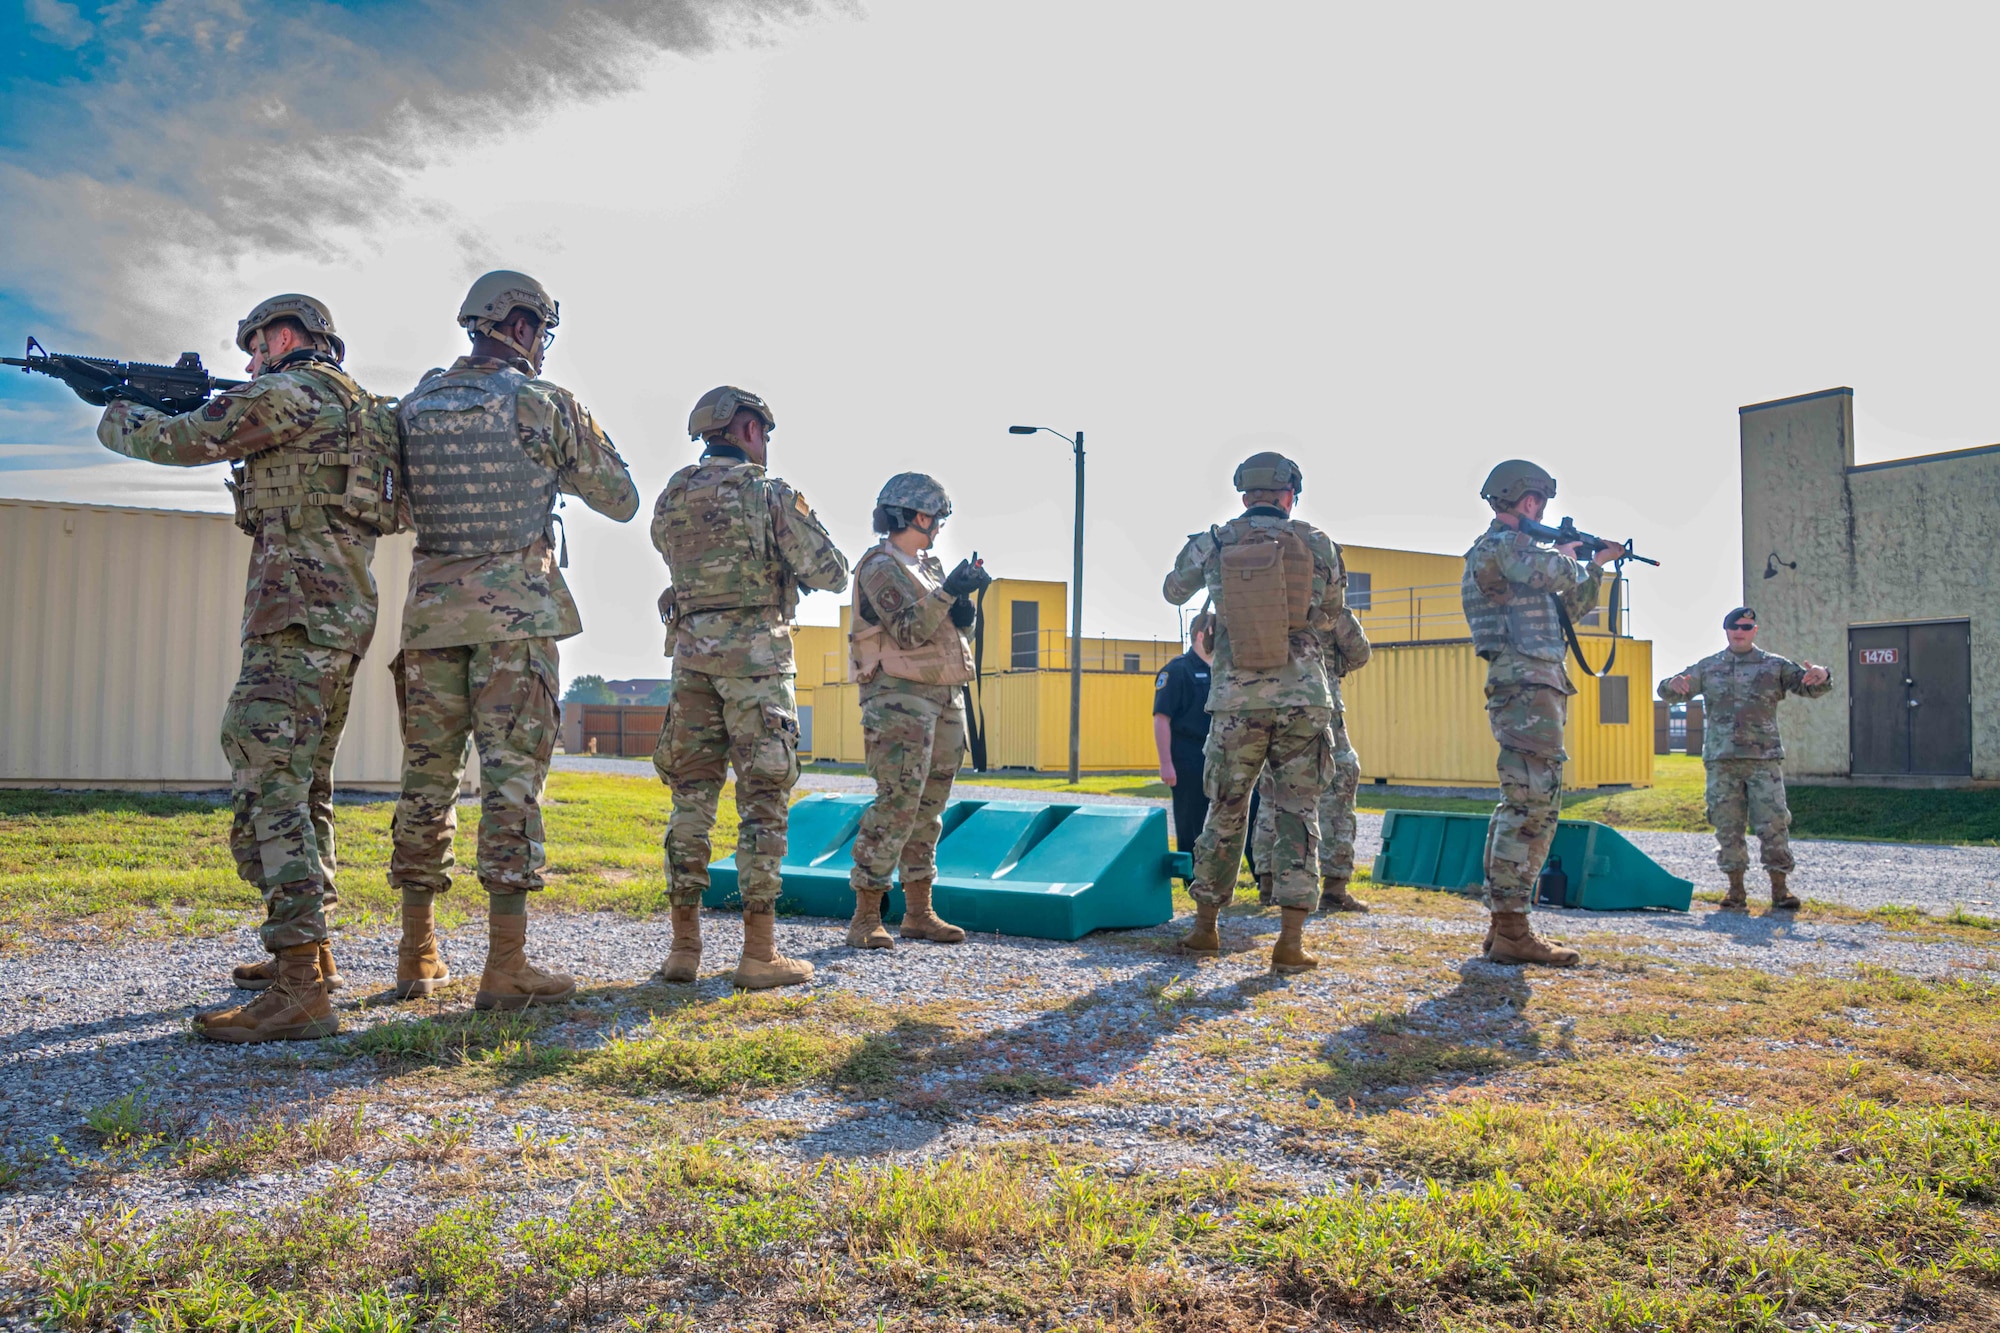 The Airmen received instructions from experienced Airmen on the best way to prepare and execute clearing various building structures